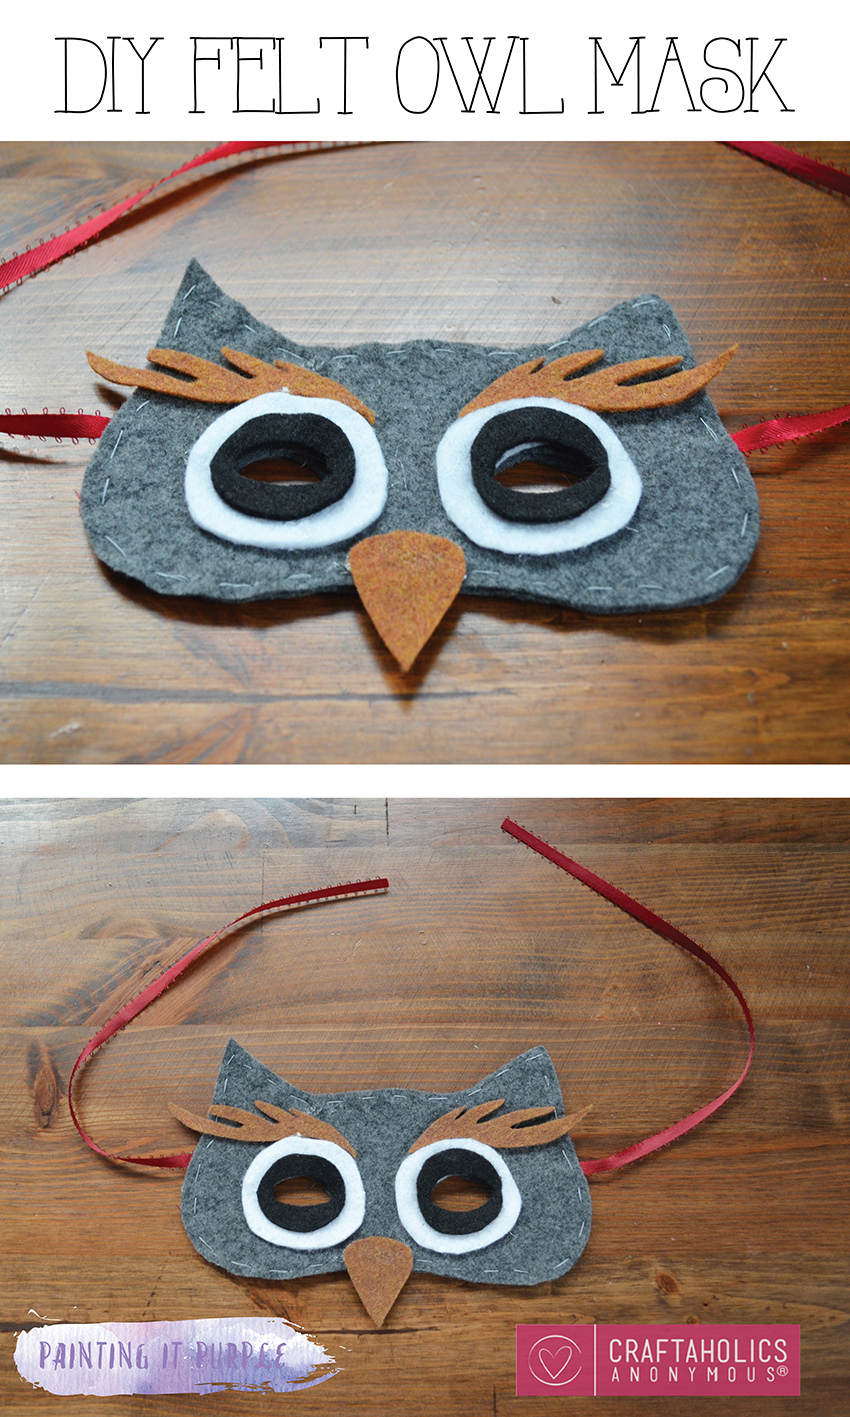 Easy Halloween Costume! This DIY Owl Mask makes an adorable and simple costume this Halloween!